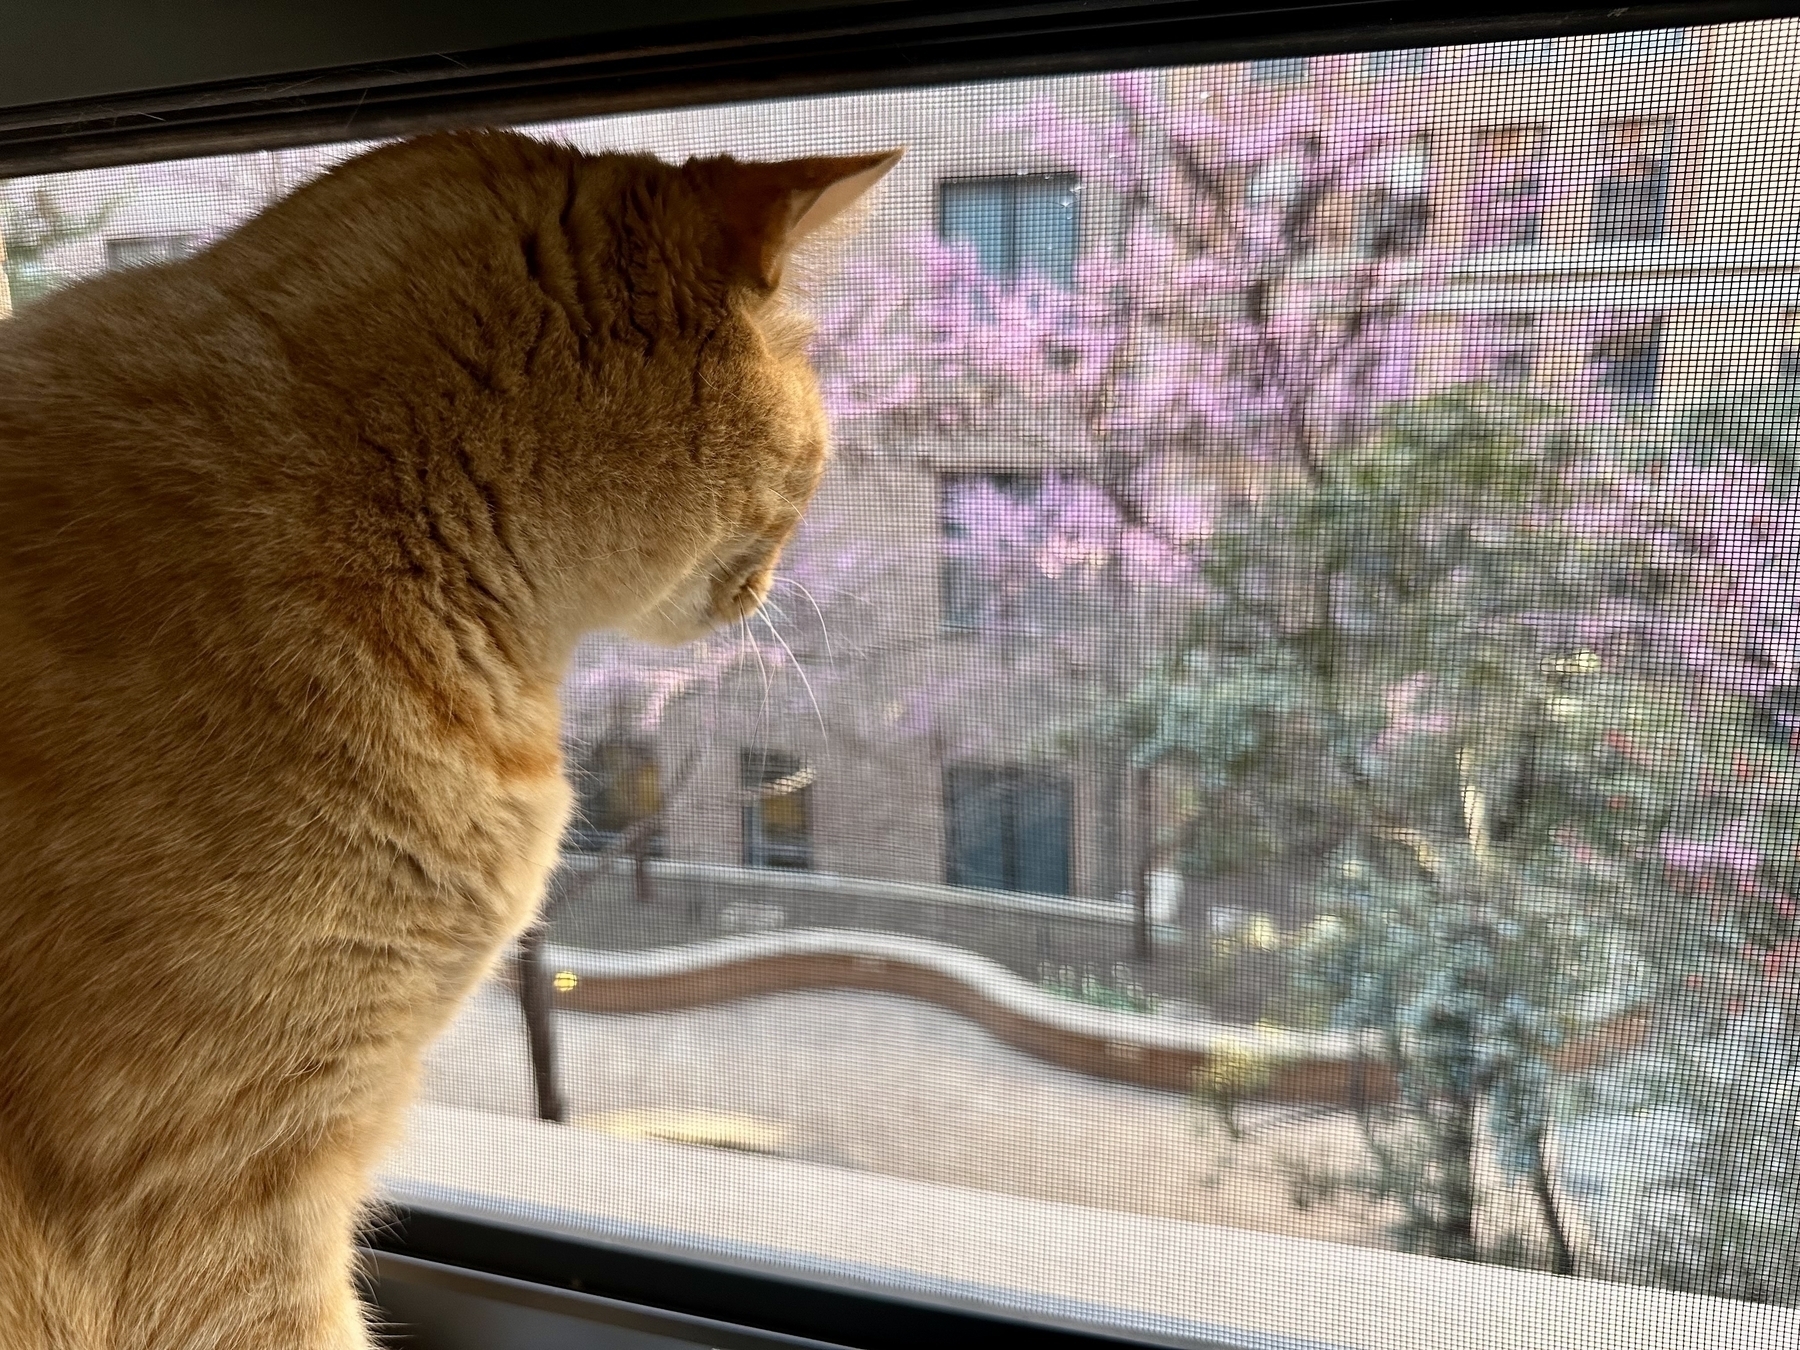 Photo of an orange tabby cat looking out an apartment window at a tree-lined inner courtyard.